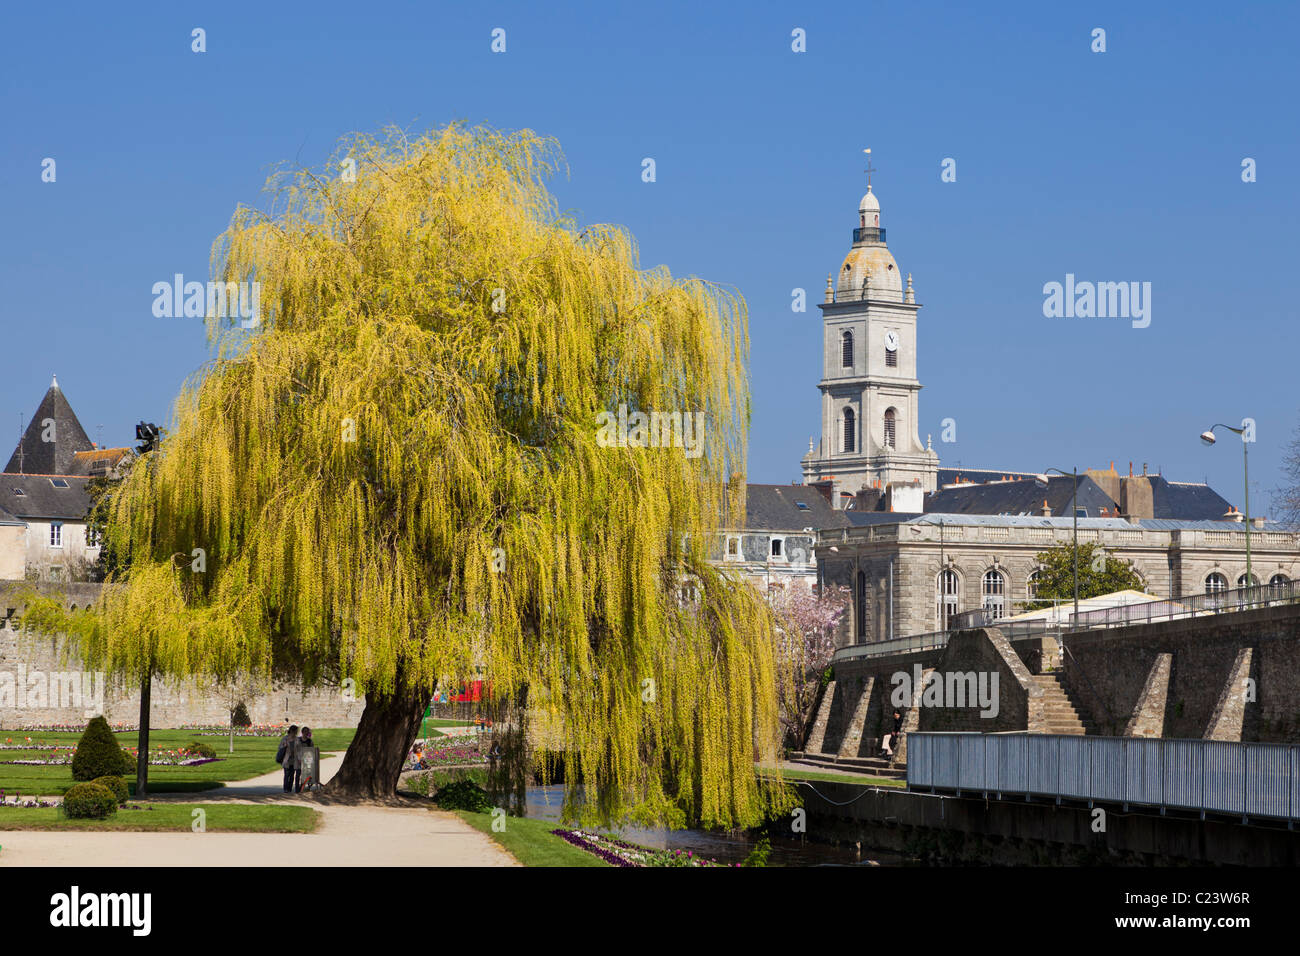 Weeping Willow tree in The Jardin des Remparts, Vannes, Morbihan, Brittany, France, Europe Stock Photo